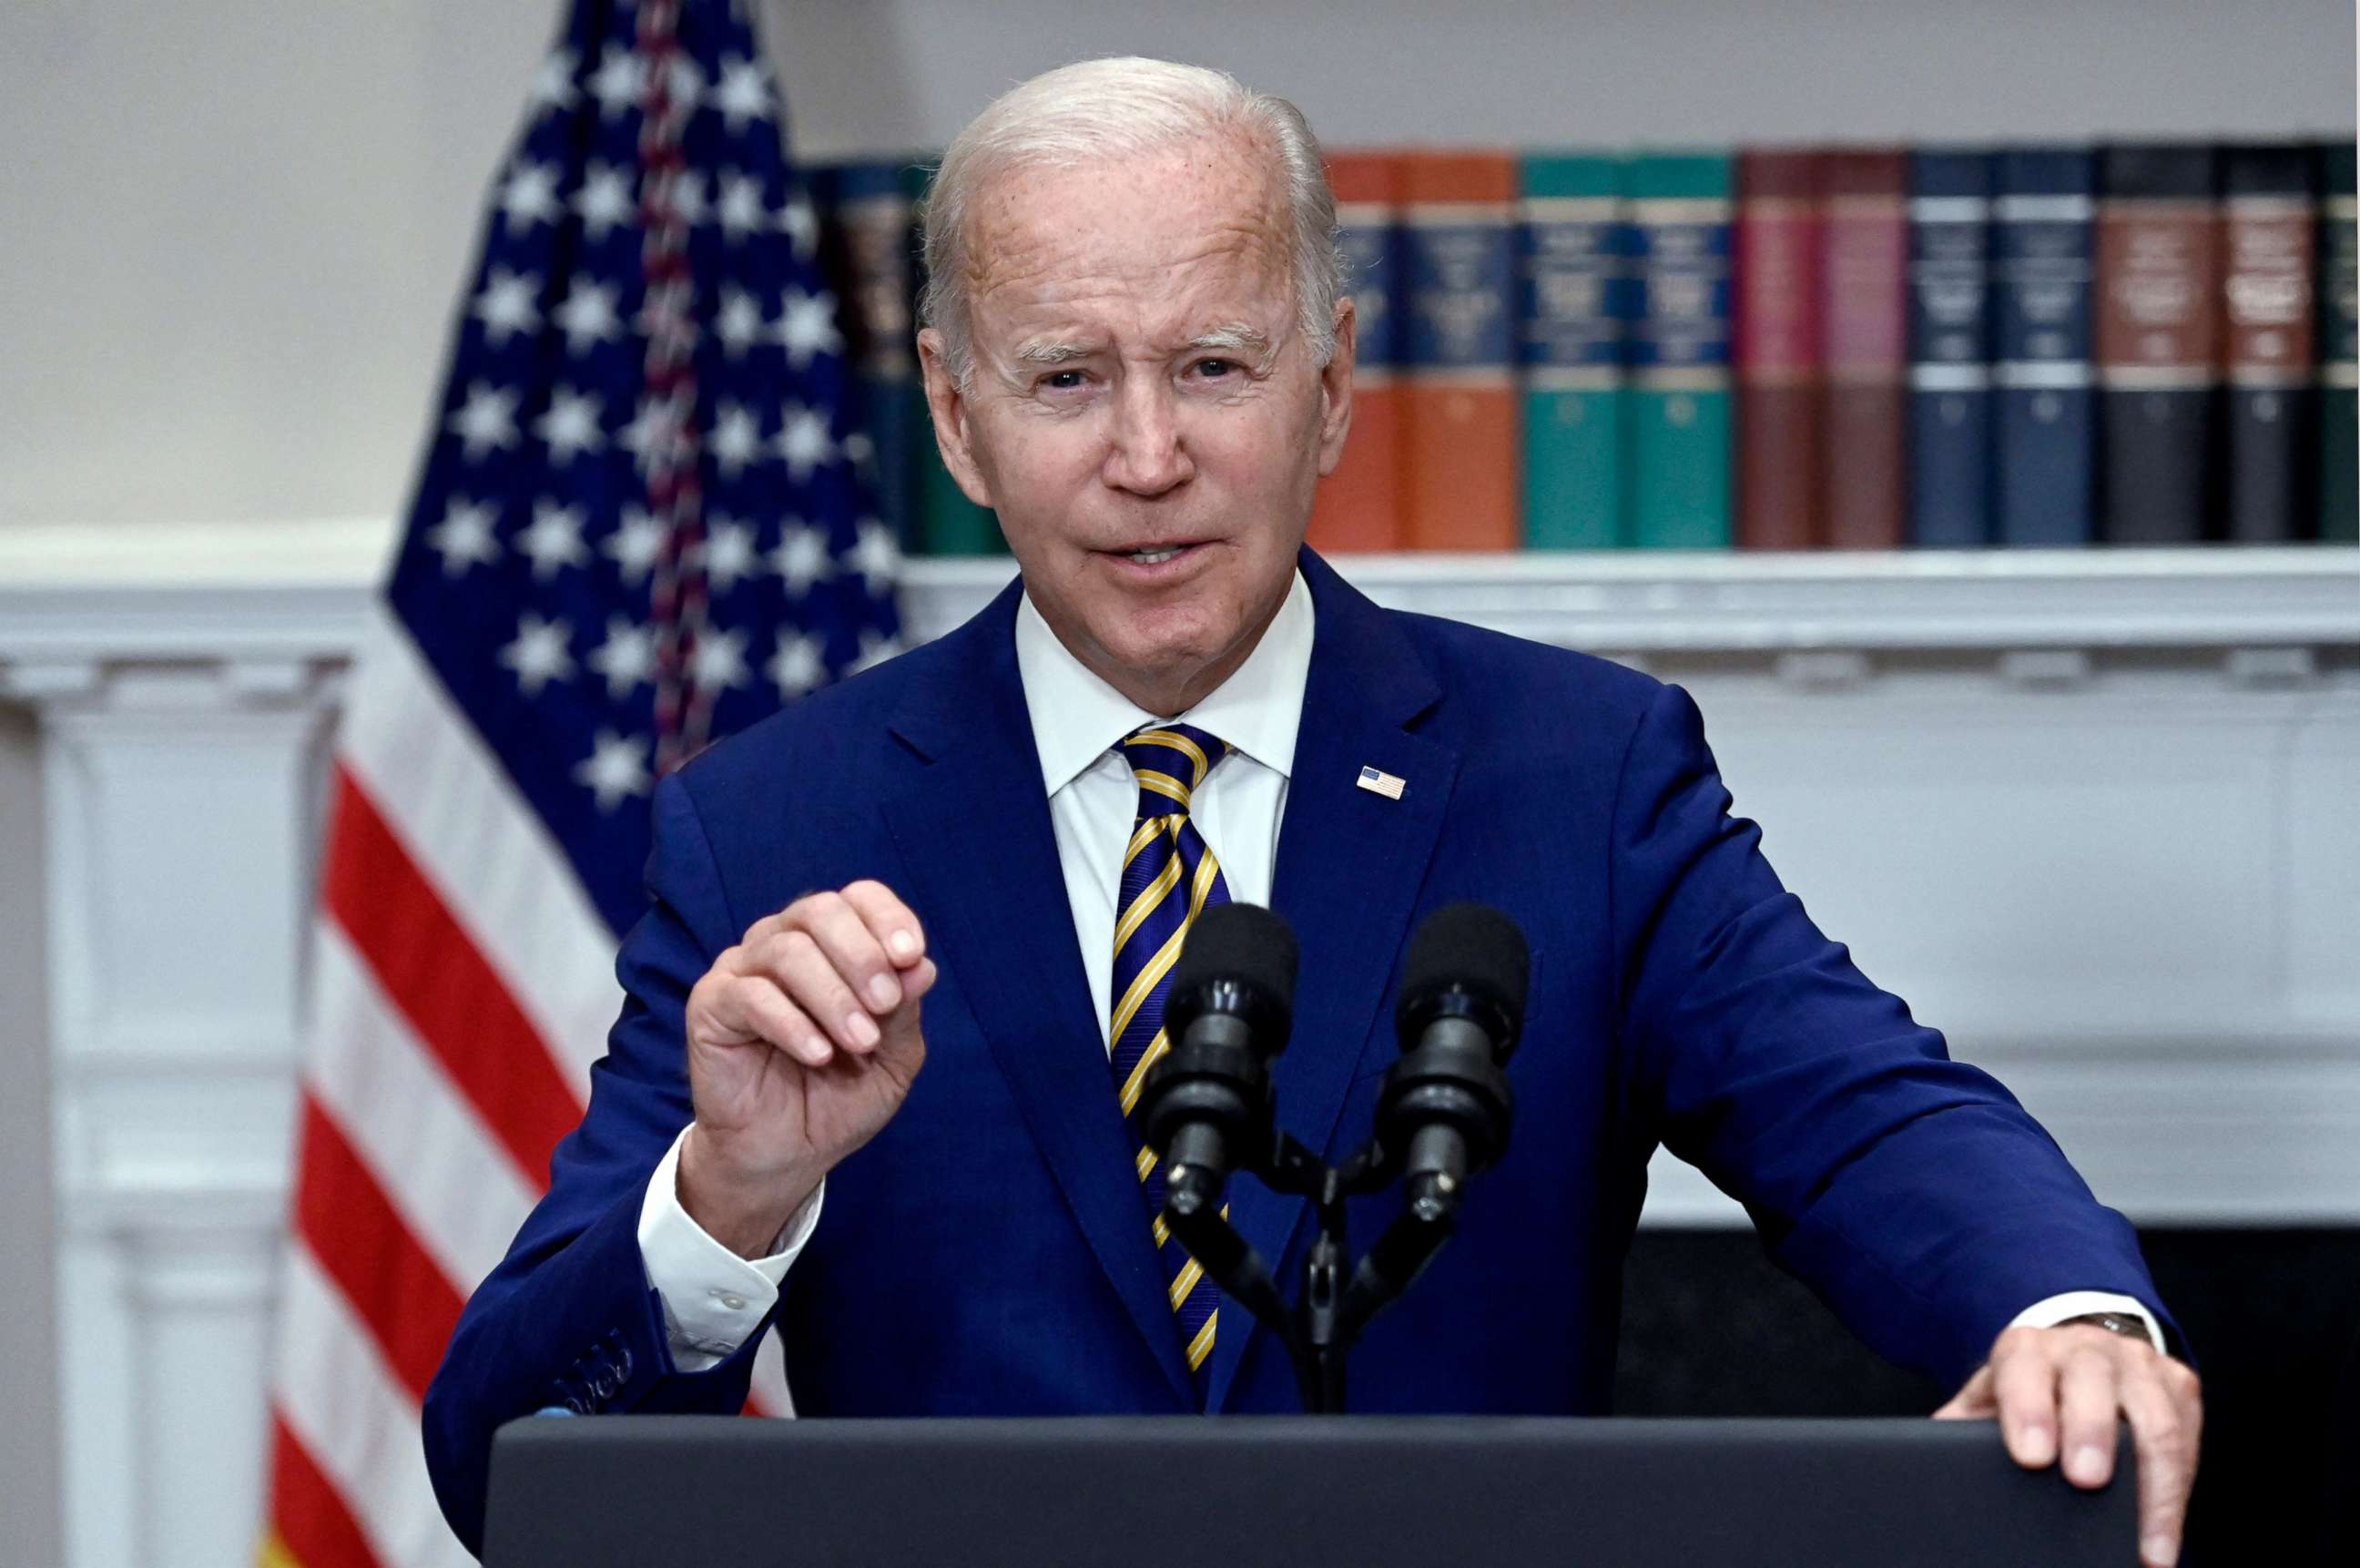 PHOTO: In this Aug. 24, 2022, file photo, President Joe Biden announces student loan relief, in the Roosevelt Room of the White House in Washington, D.C..